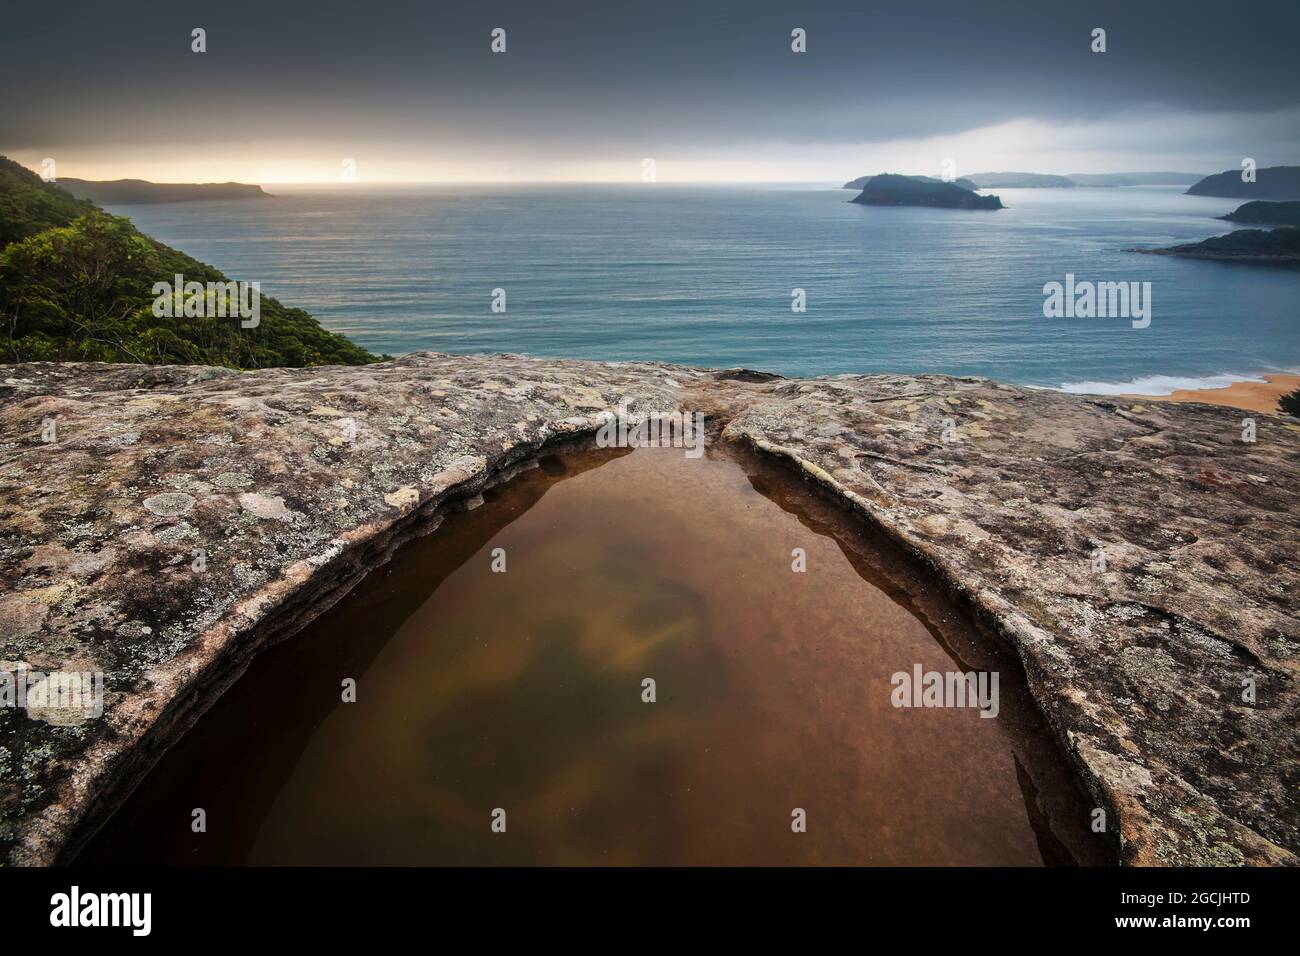 a puddle on a mountain overlooking pearl beach Stock Photo